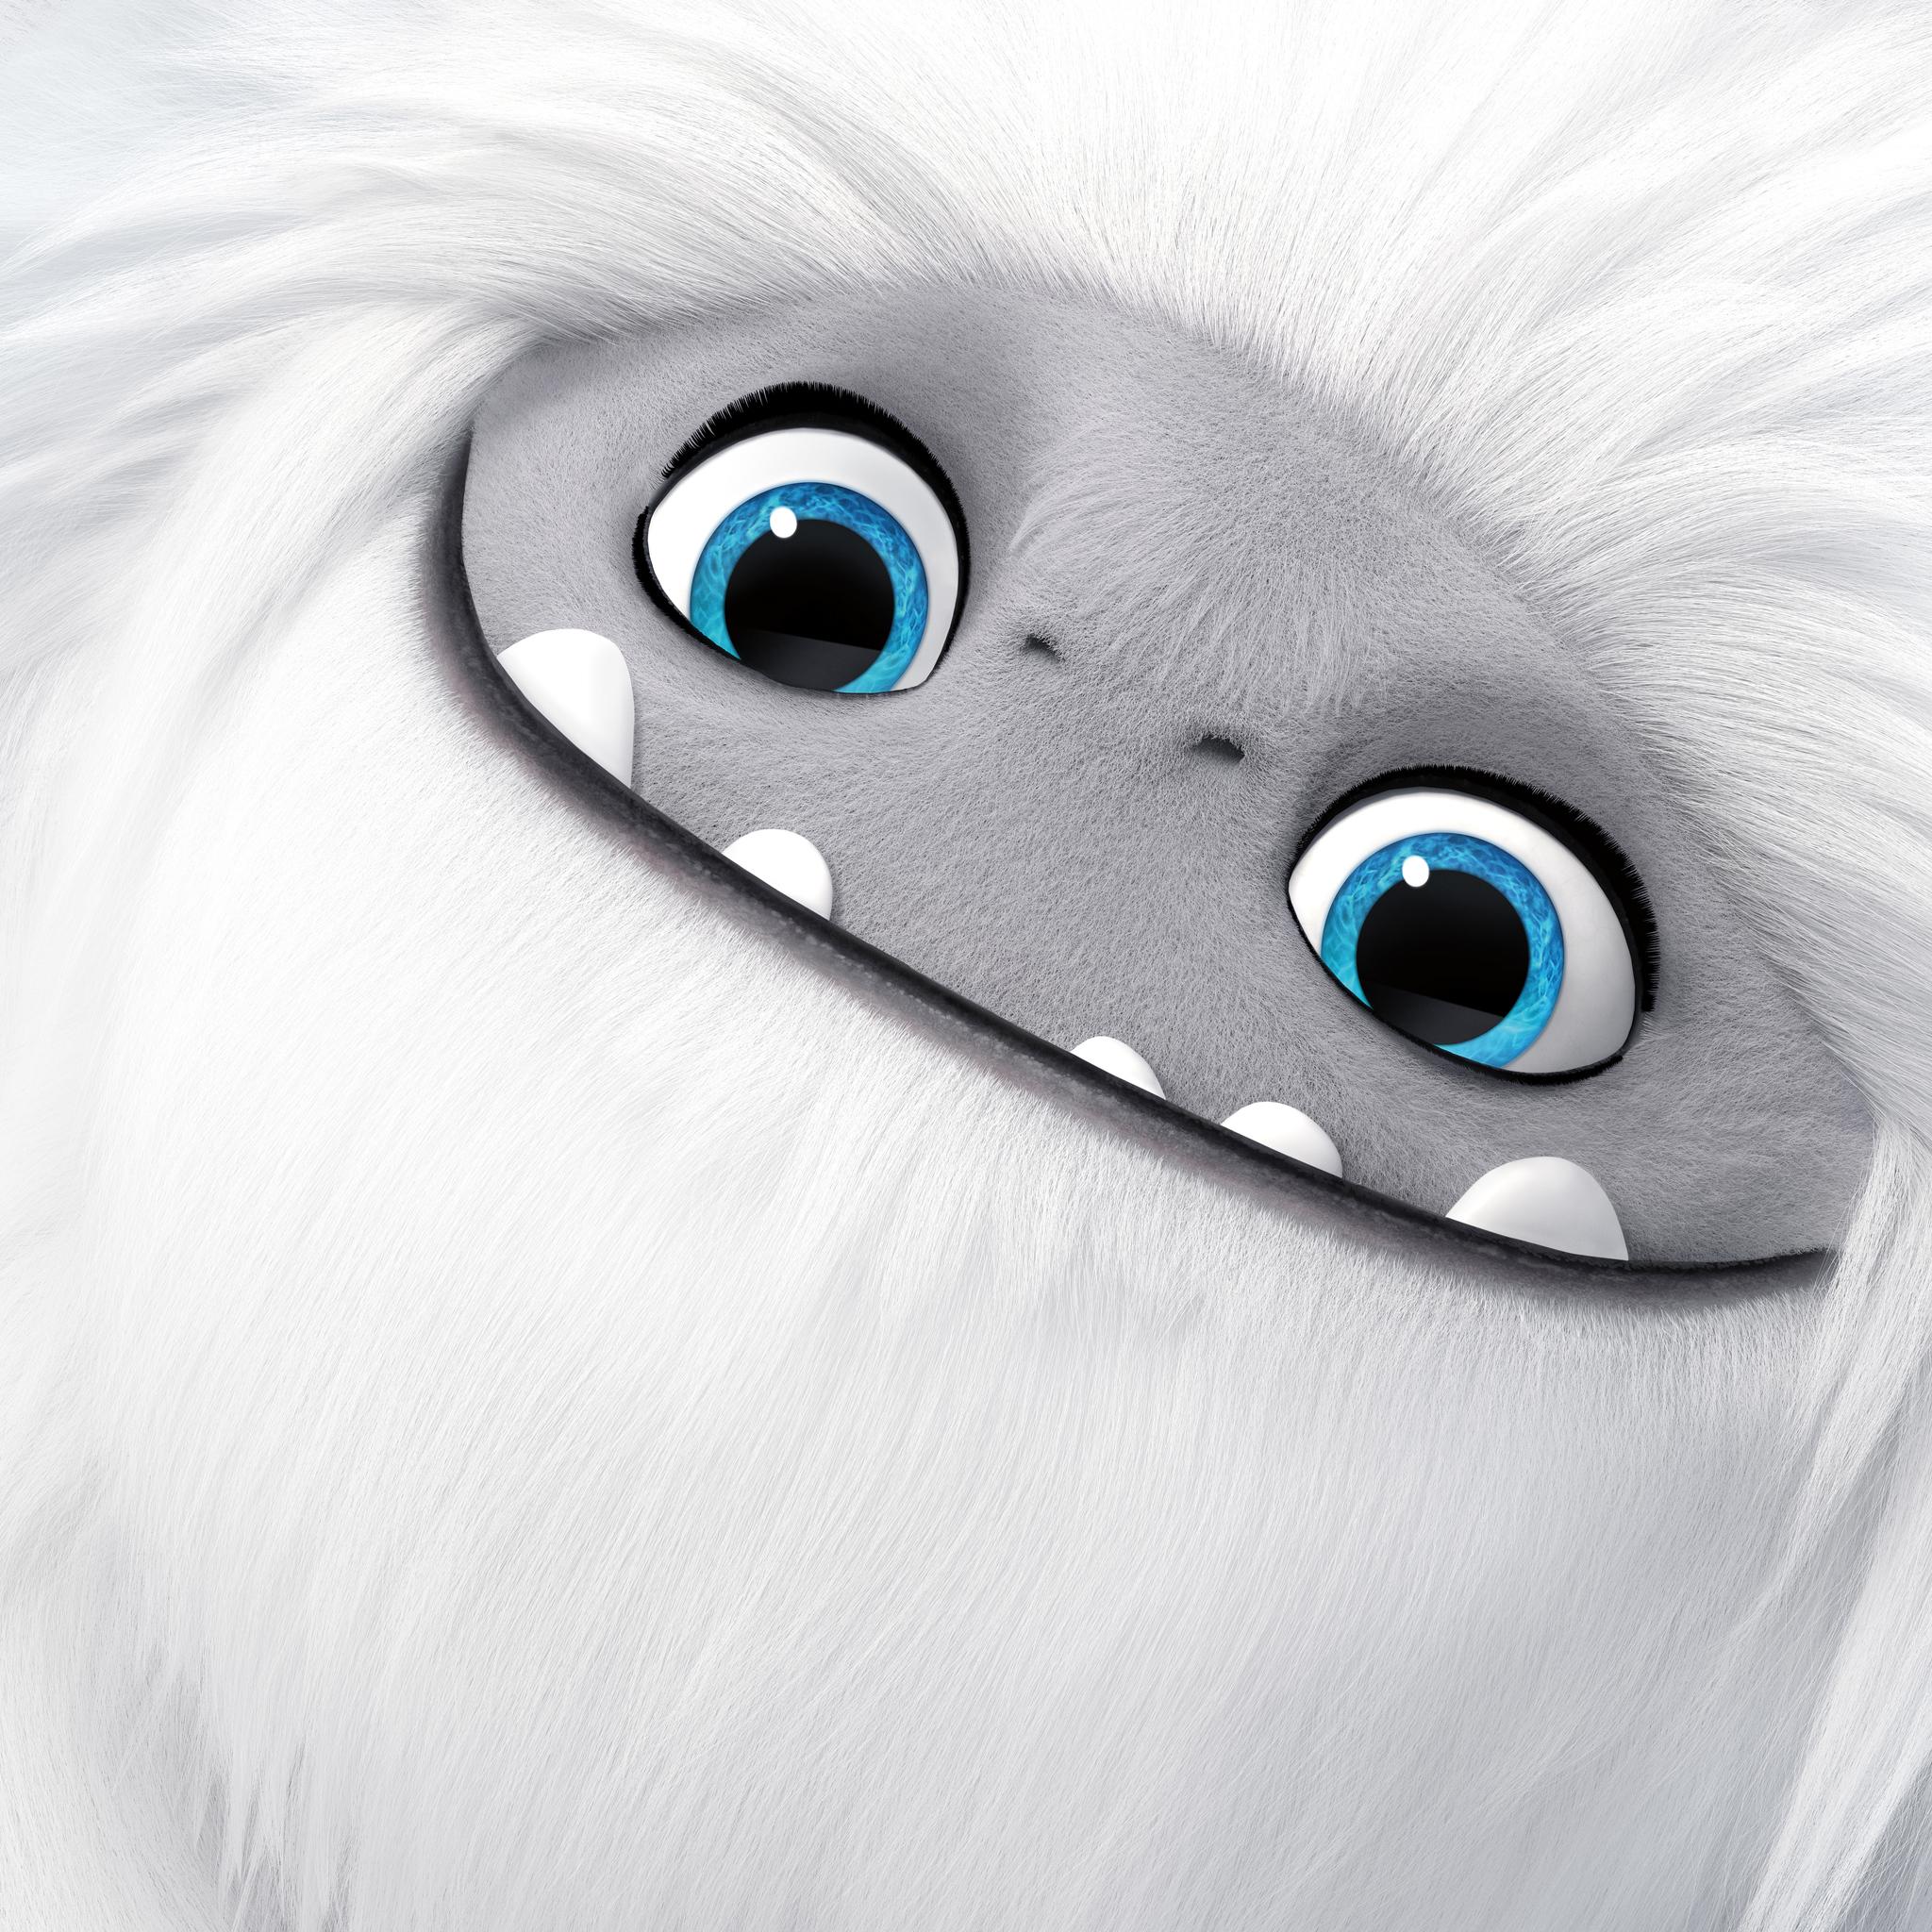 Abominable 2019 Animation Wallpapers Wallpaper Cave